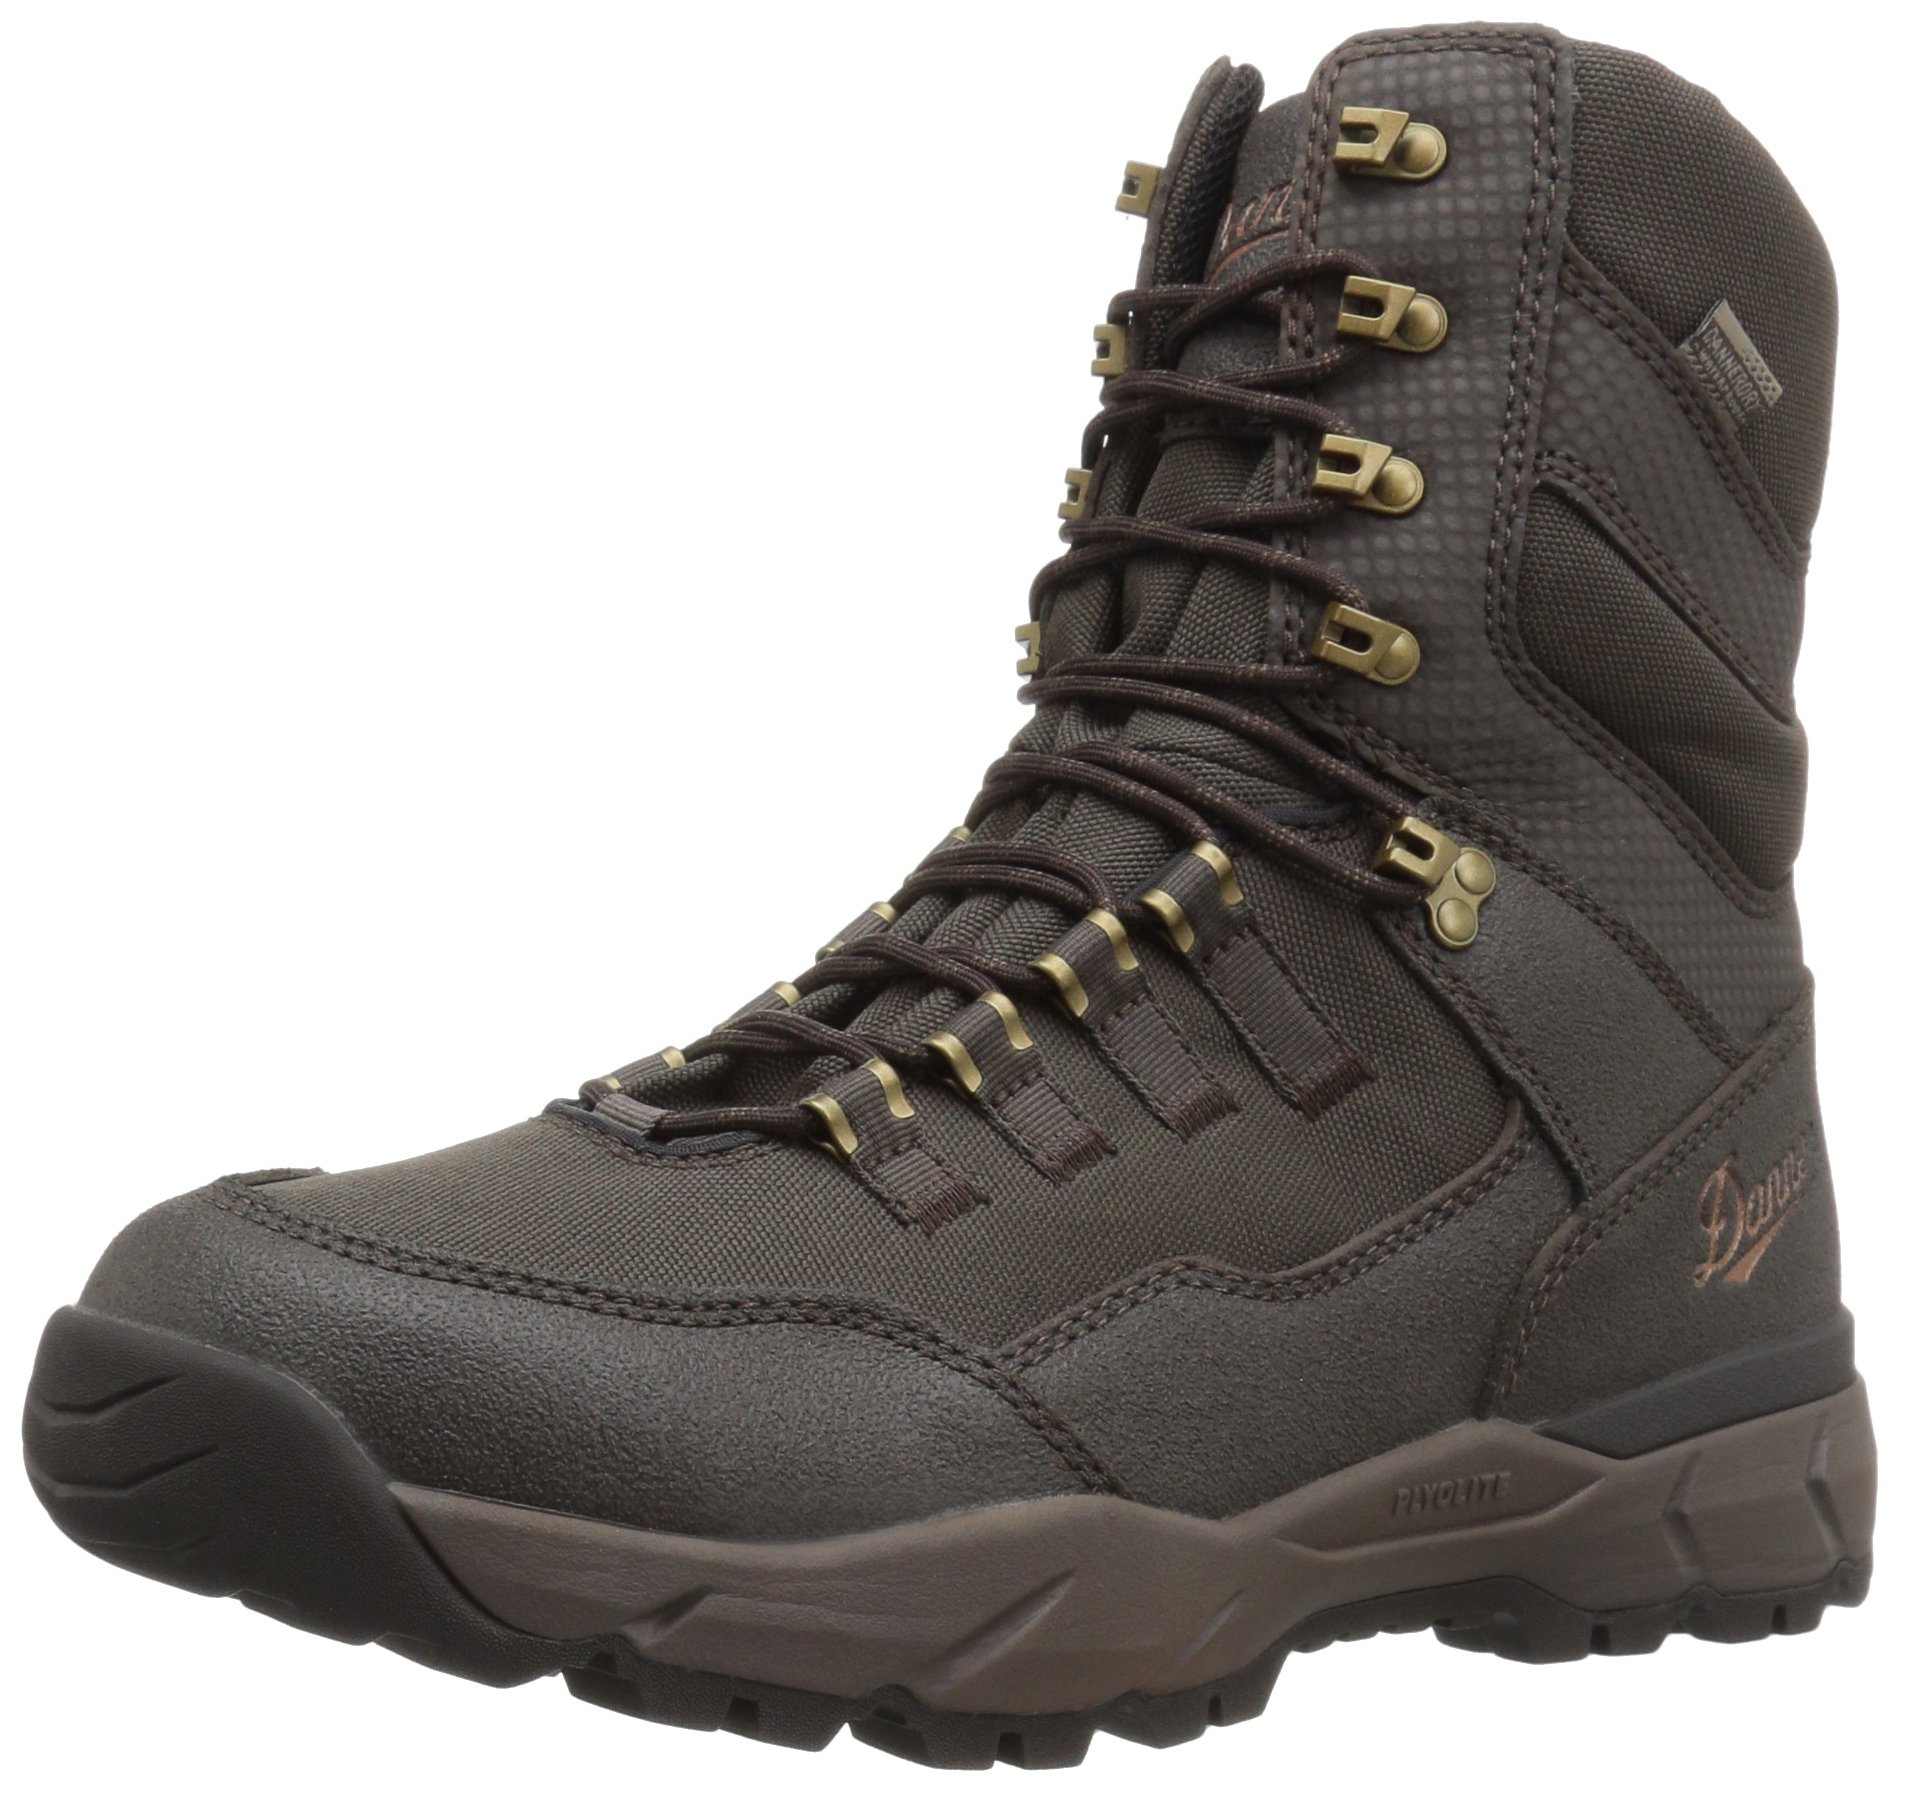 Danner Men's Vital Insulated 800g Hunting Shoes